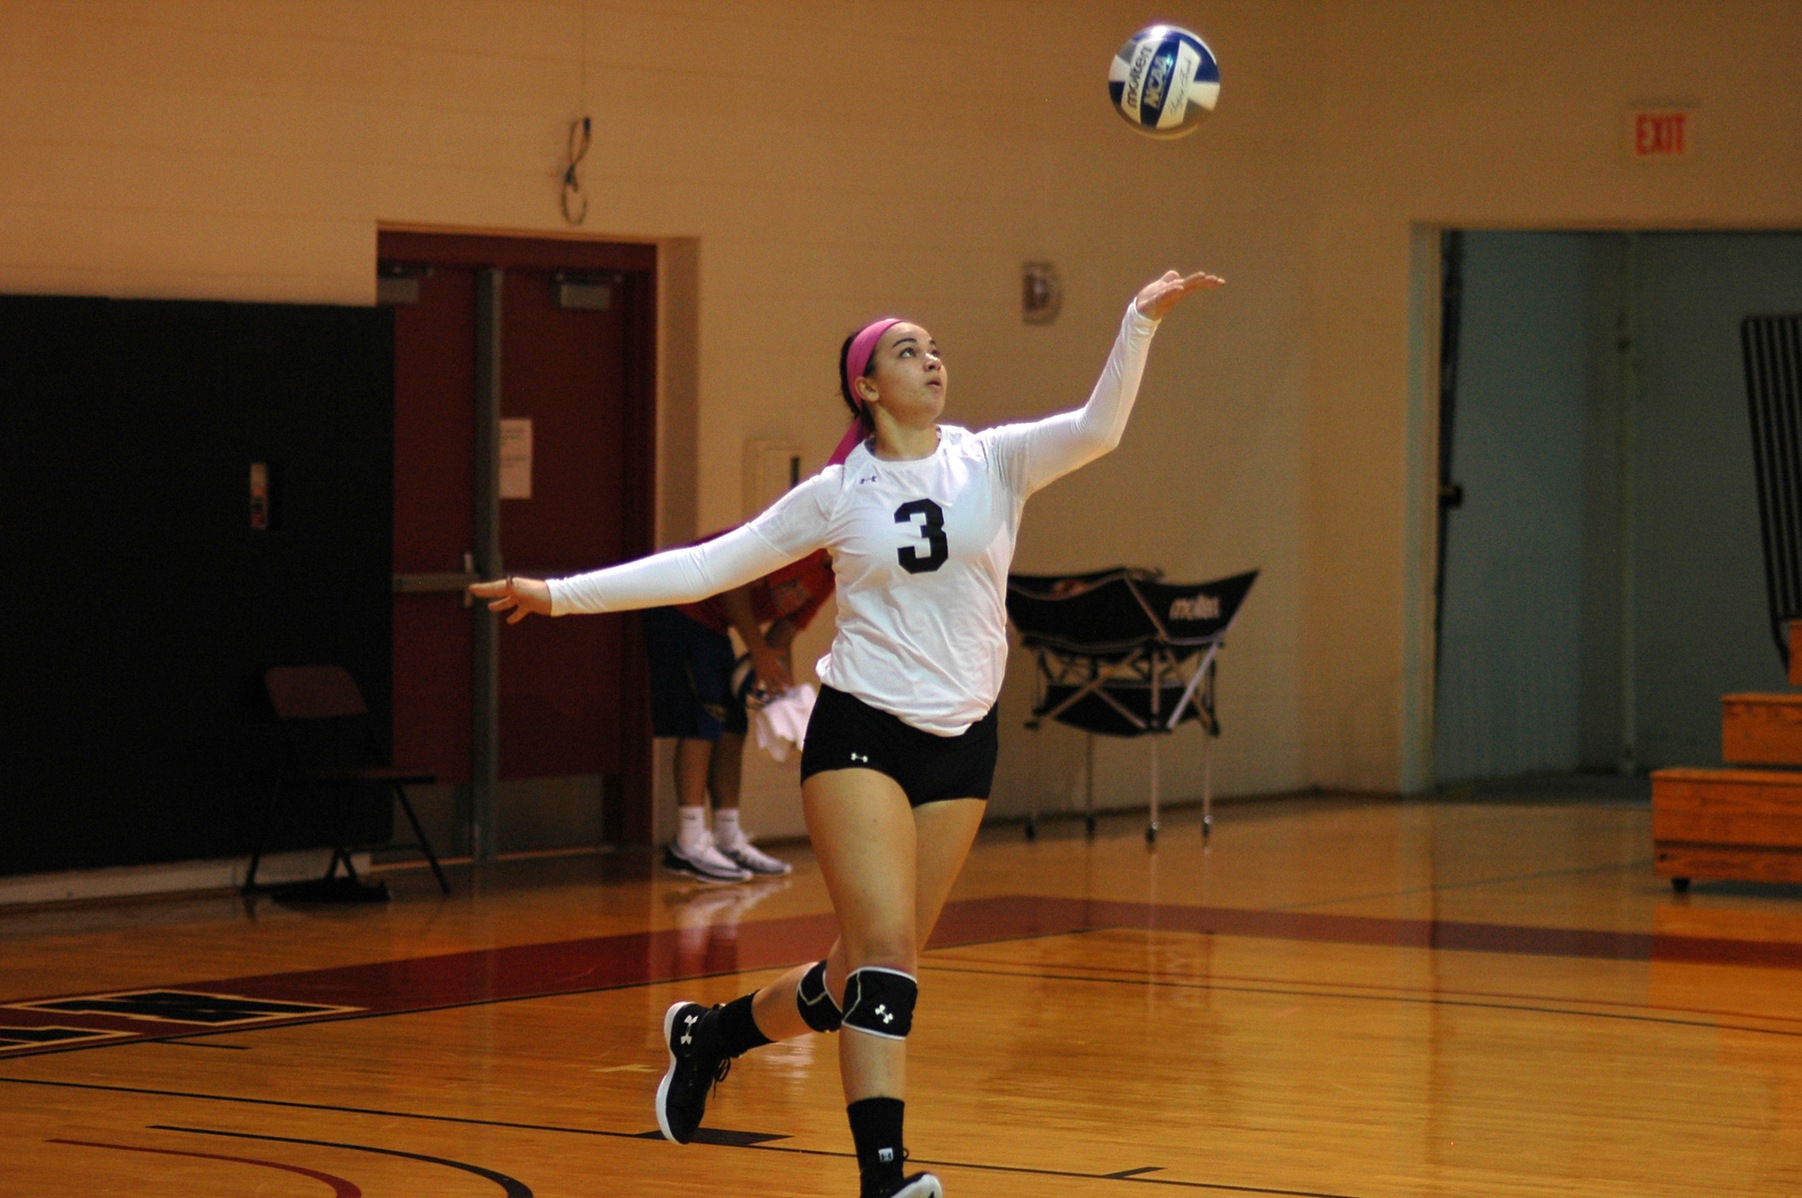 The Dominican College women's volleyball team opened up the season with two losses to Southern Connecticut State University and Pace University.